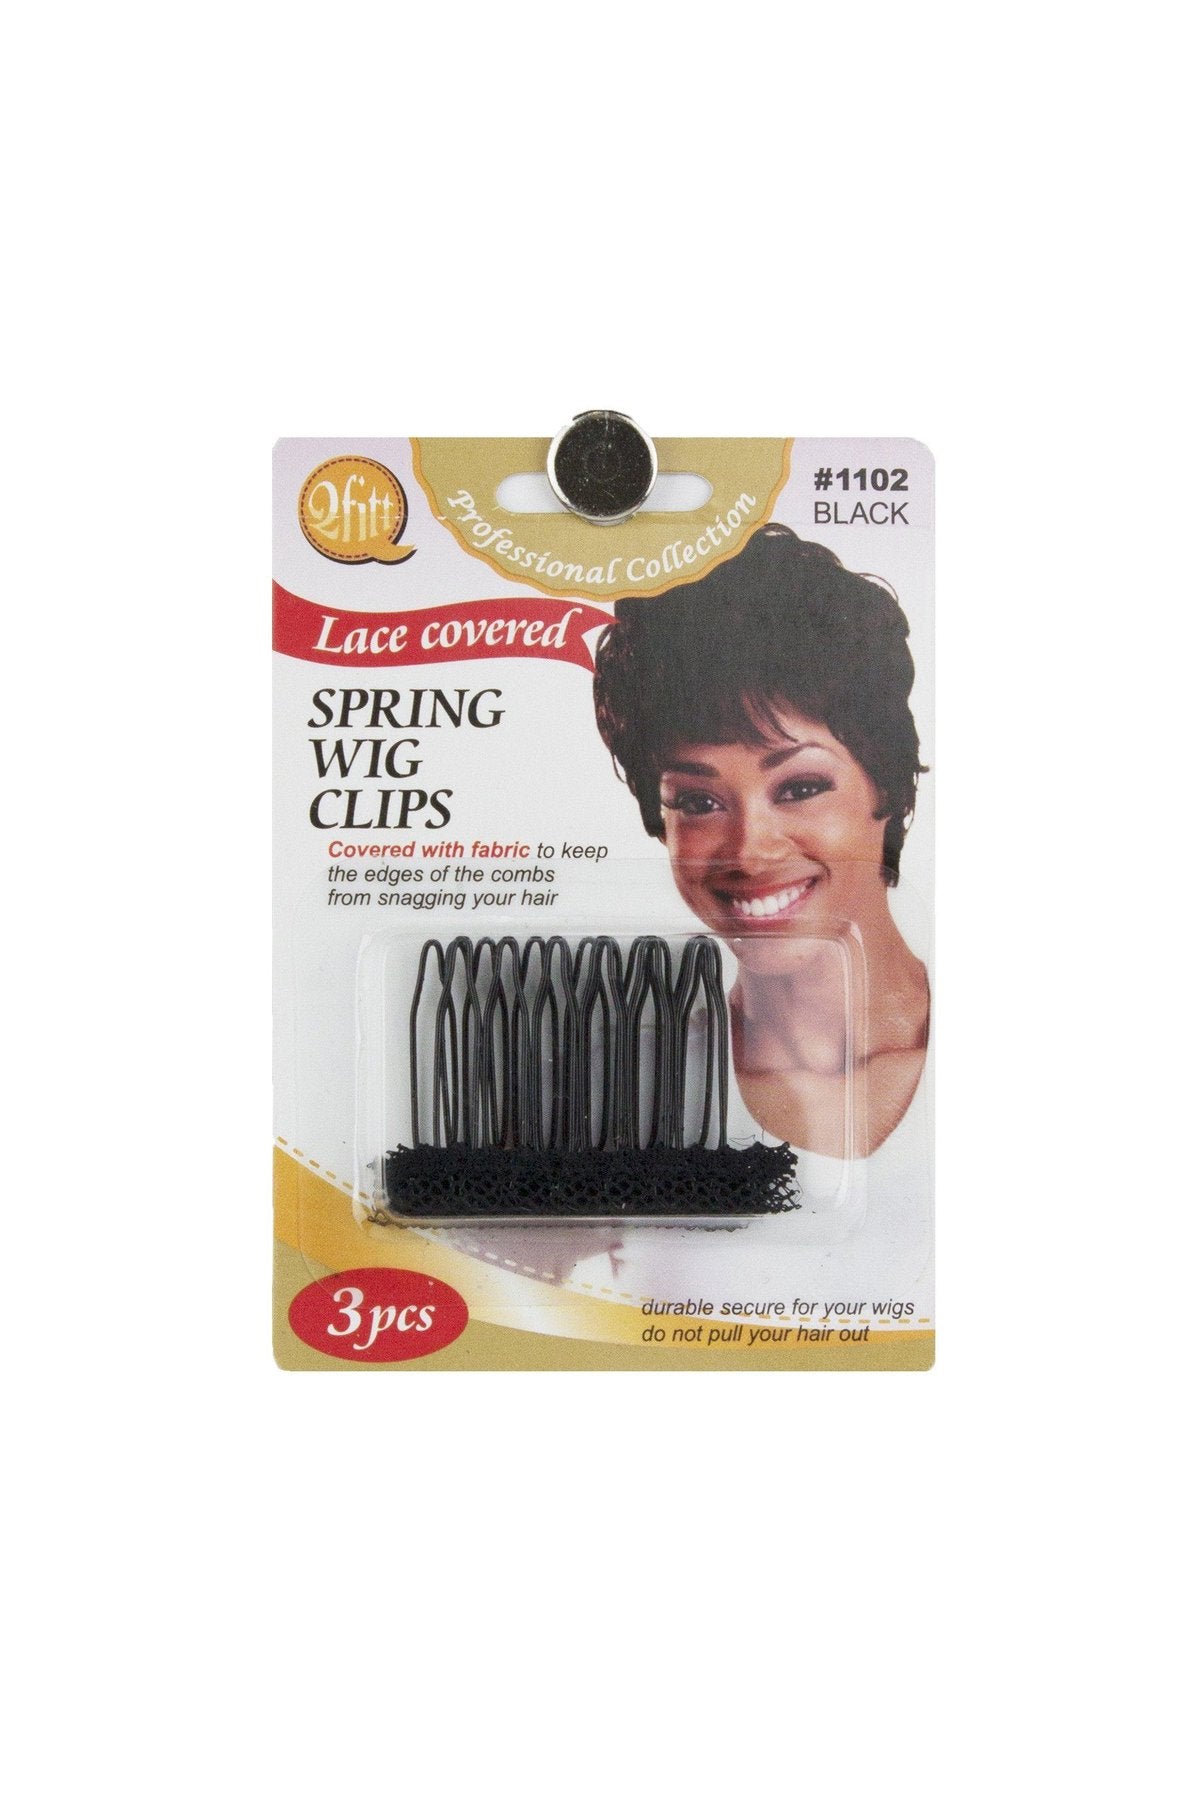 Qfitt Lace Covered Spring Wig Clips #1102 Black - Beauty Bar & Supply